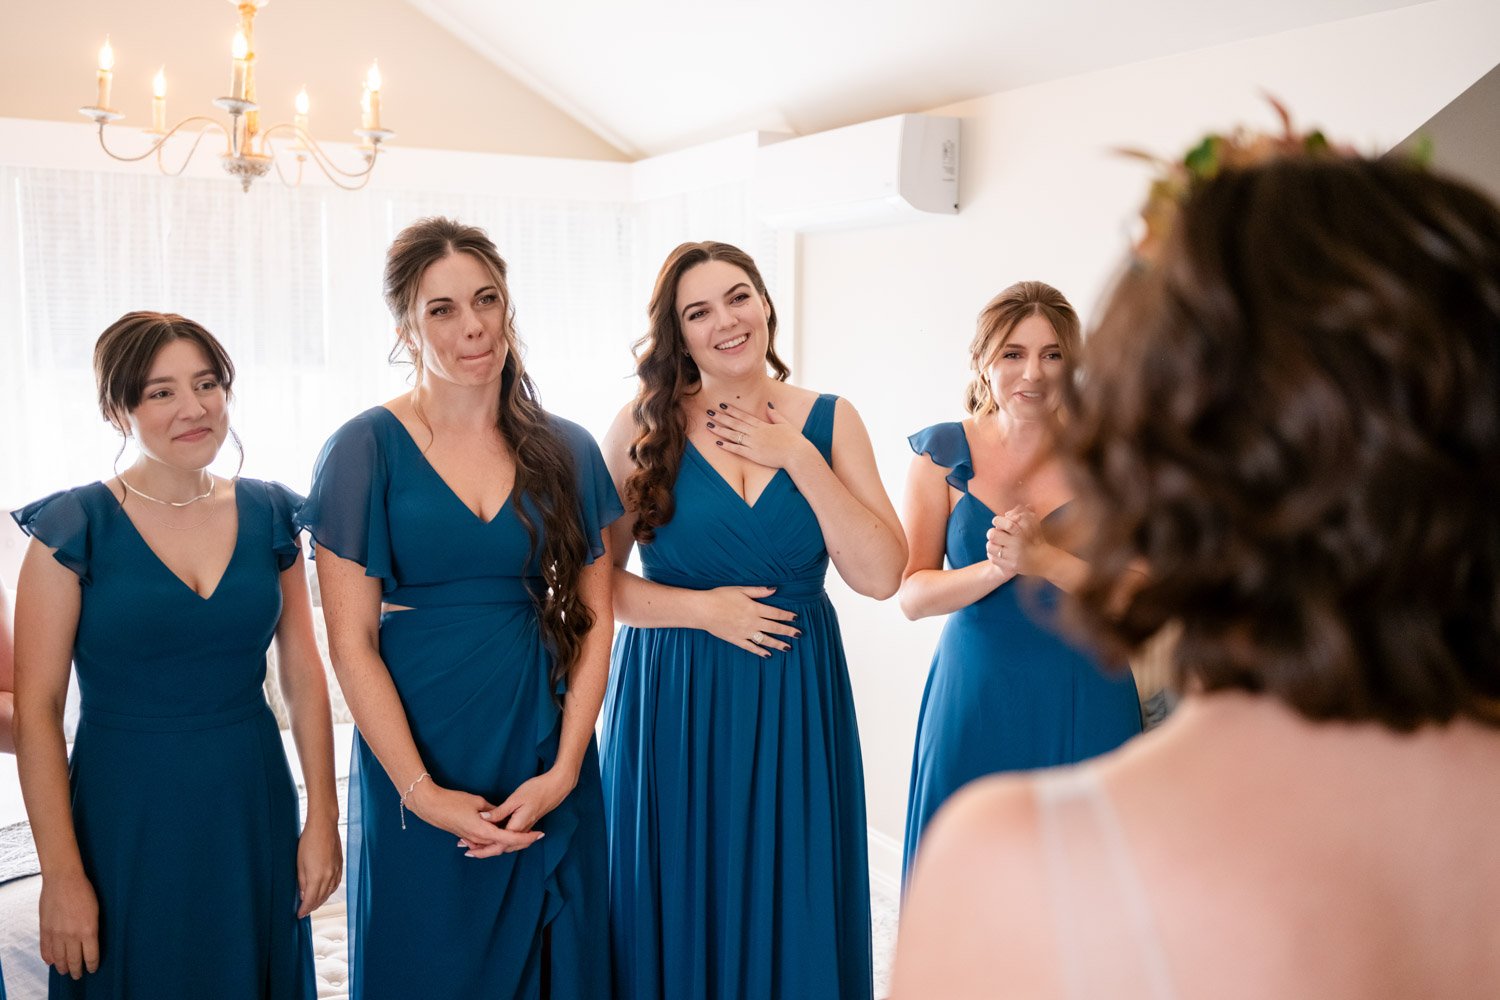 photo of bridesmaids reacting to seeing the bride in her wedding dress for the first time.